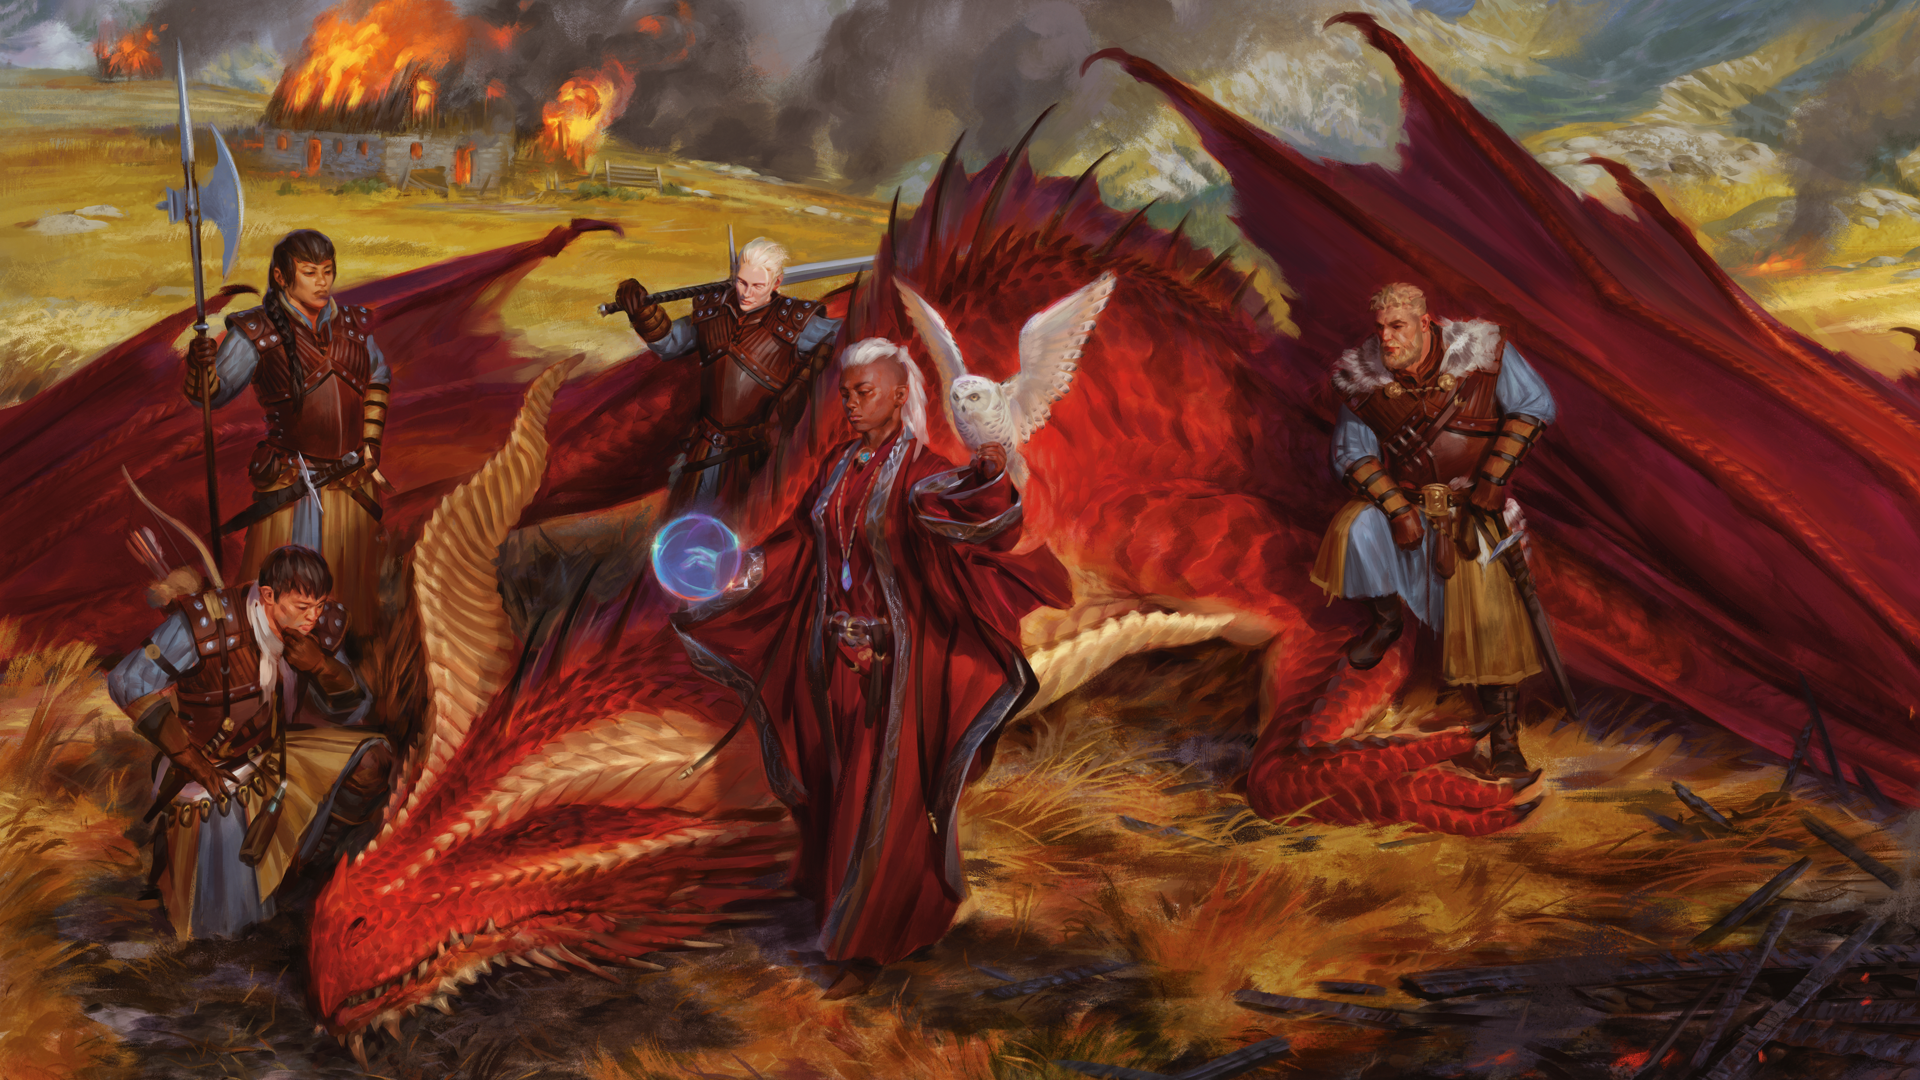 Image for D&D 5E’s Dragonlance adventure has a release date, was inspired by Saving Private Ryan and WW2 photos